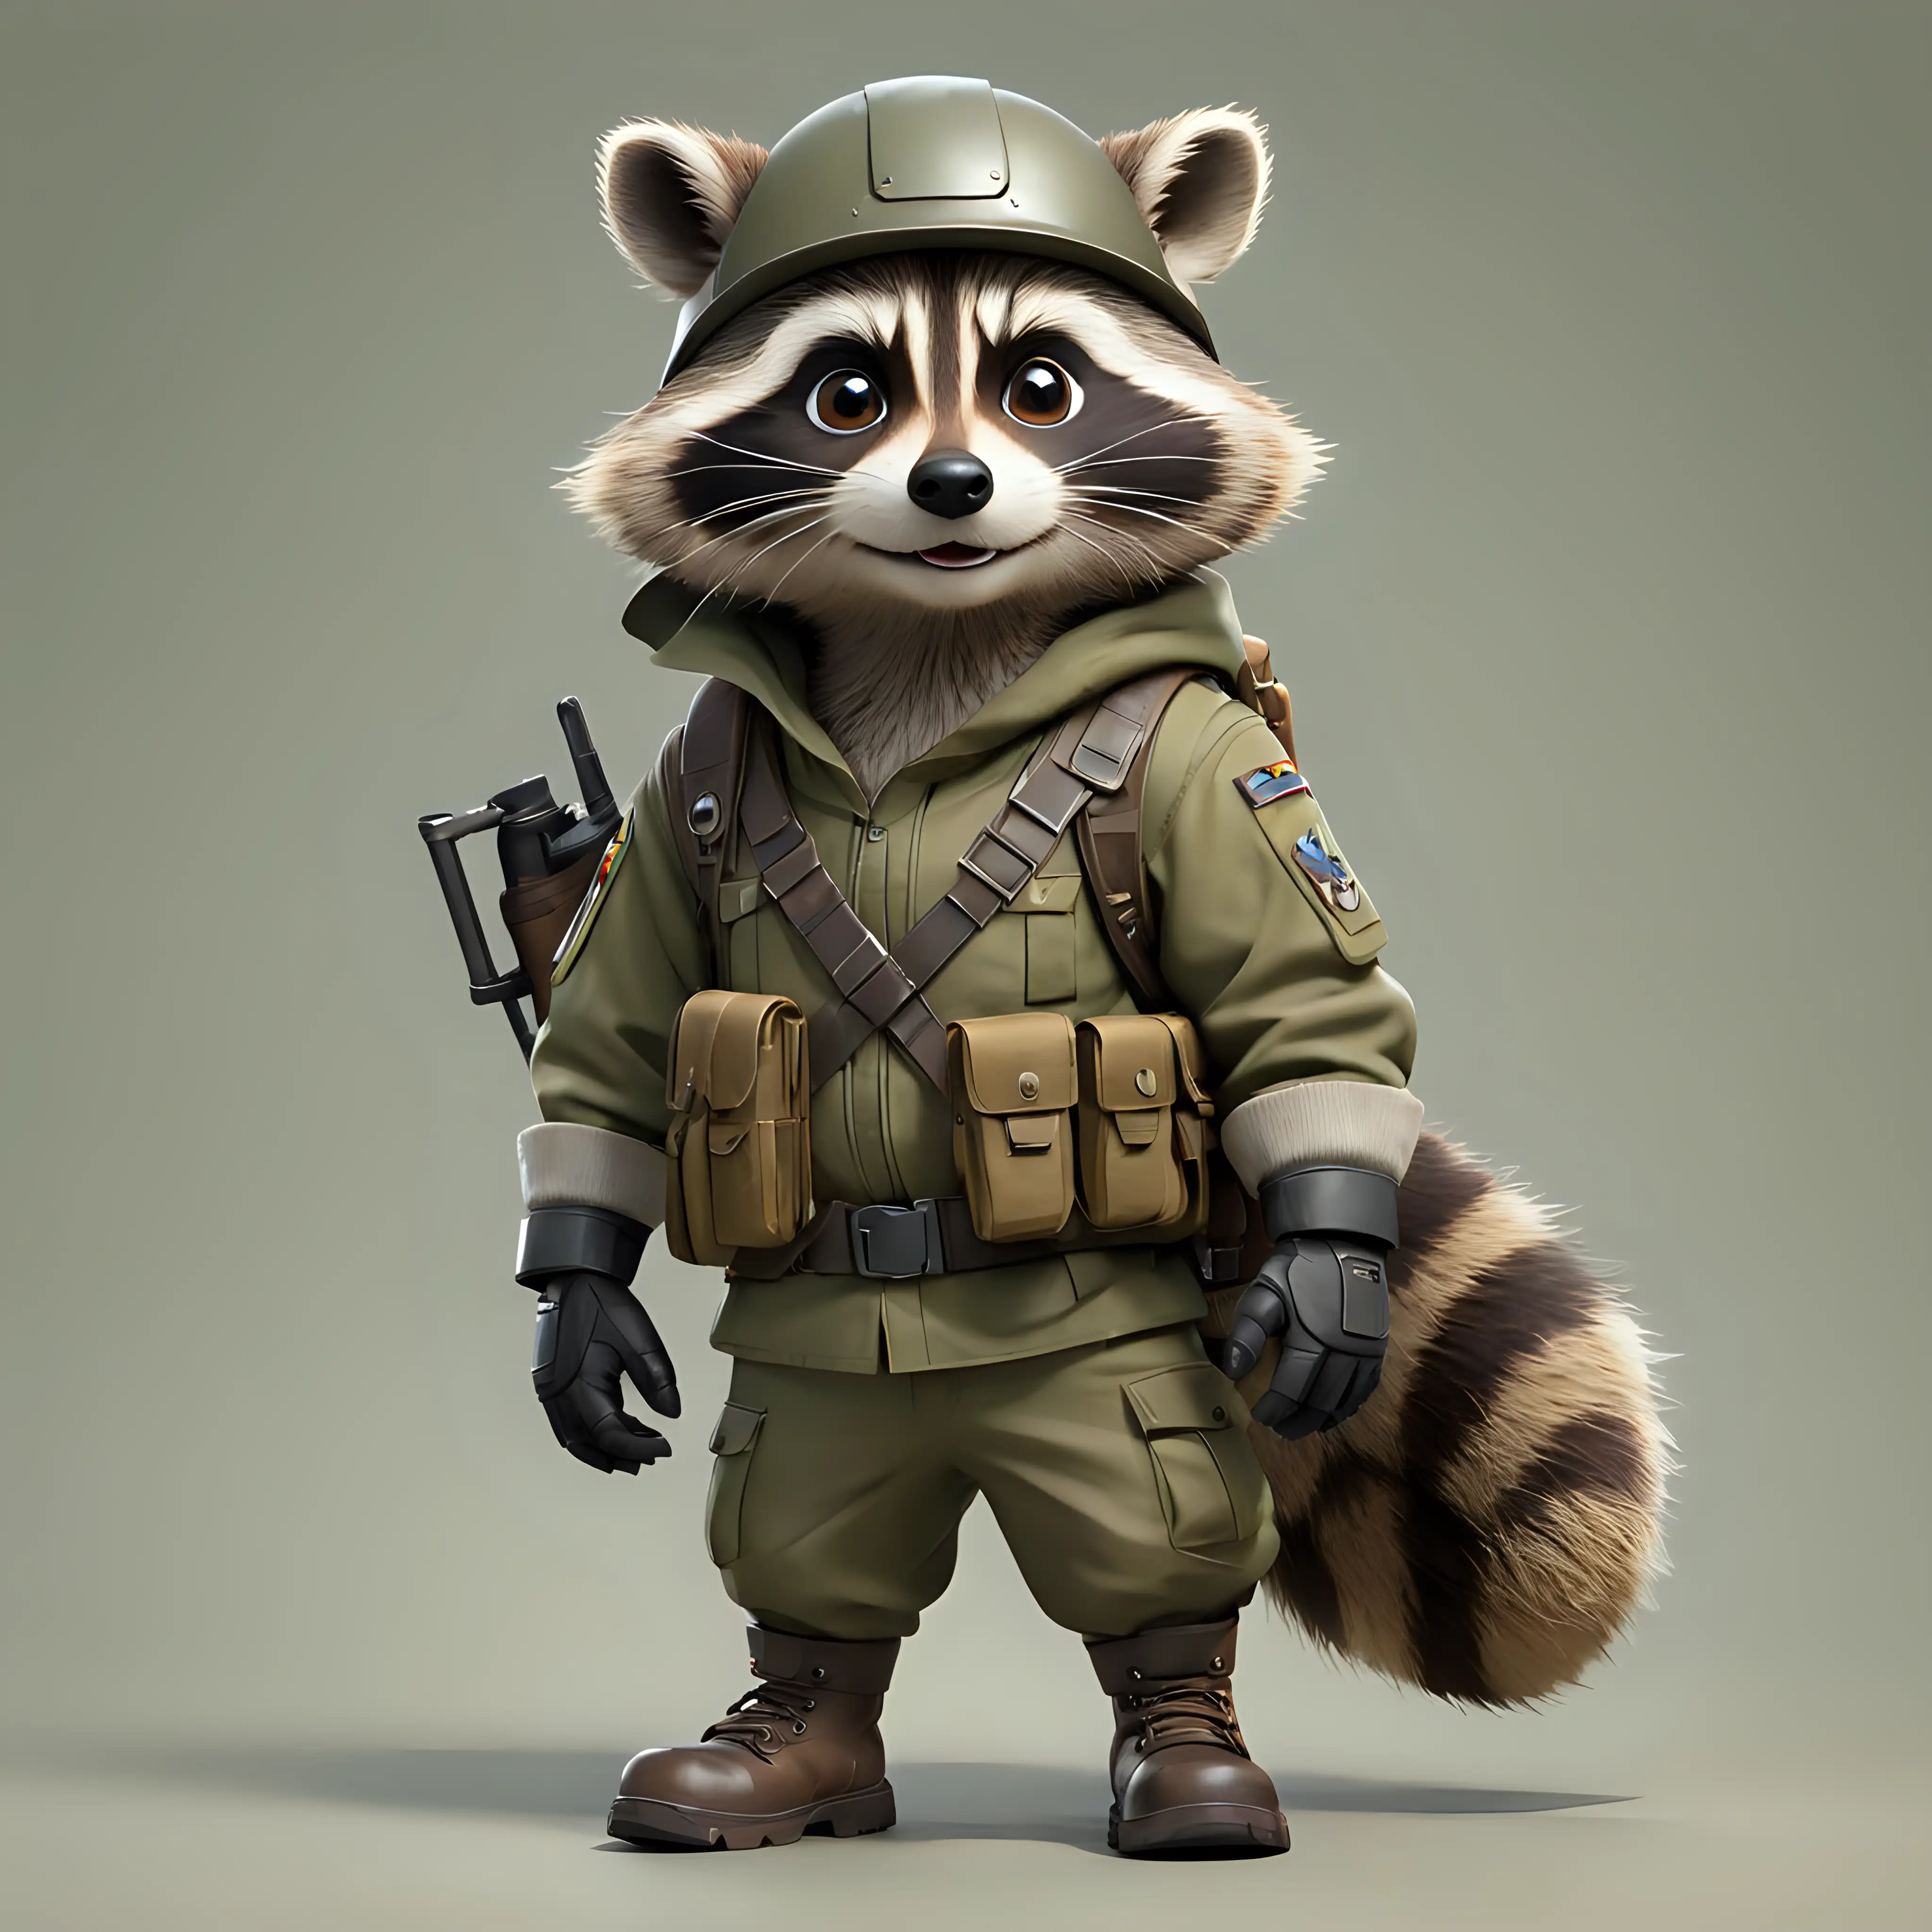 Cartoon Raccoon Soldier Adorable Character in Military Attire